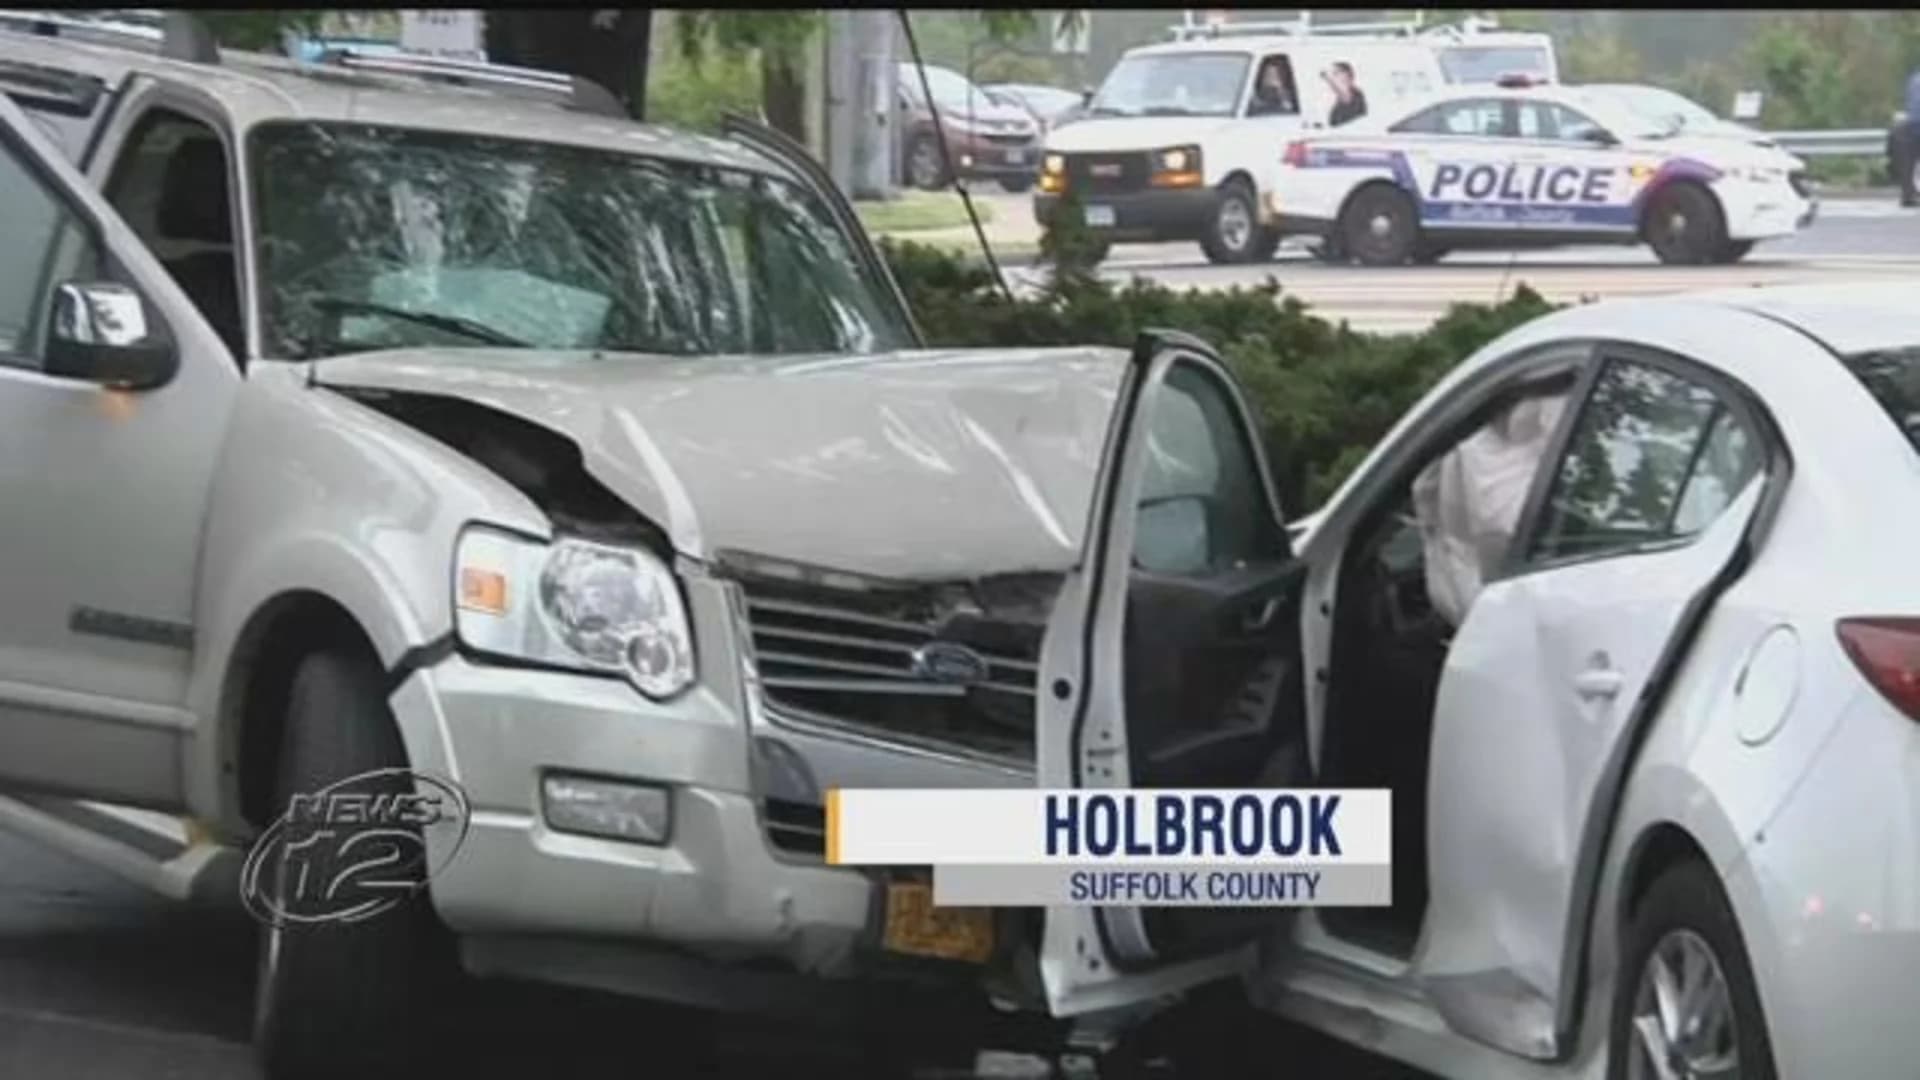 Man charged with DWI after crashing into police car in Holbrook